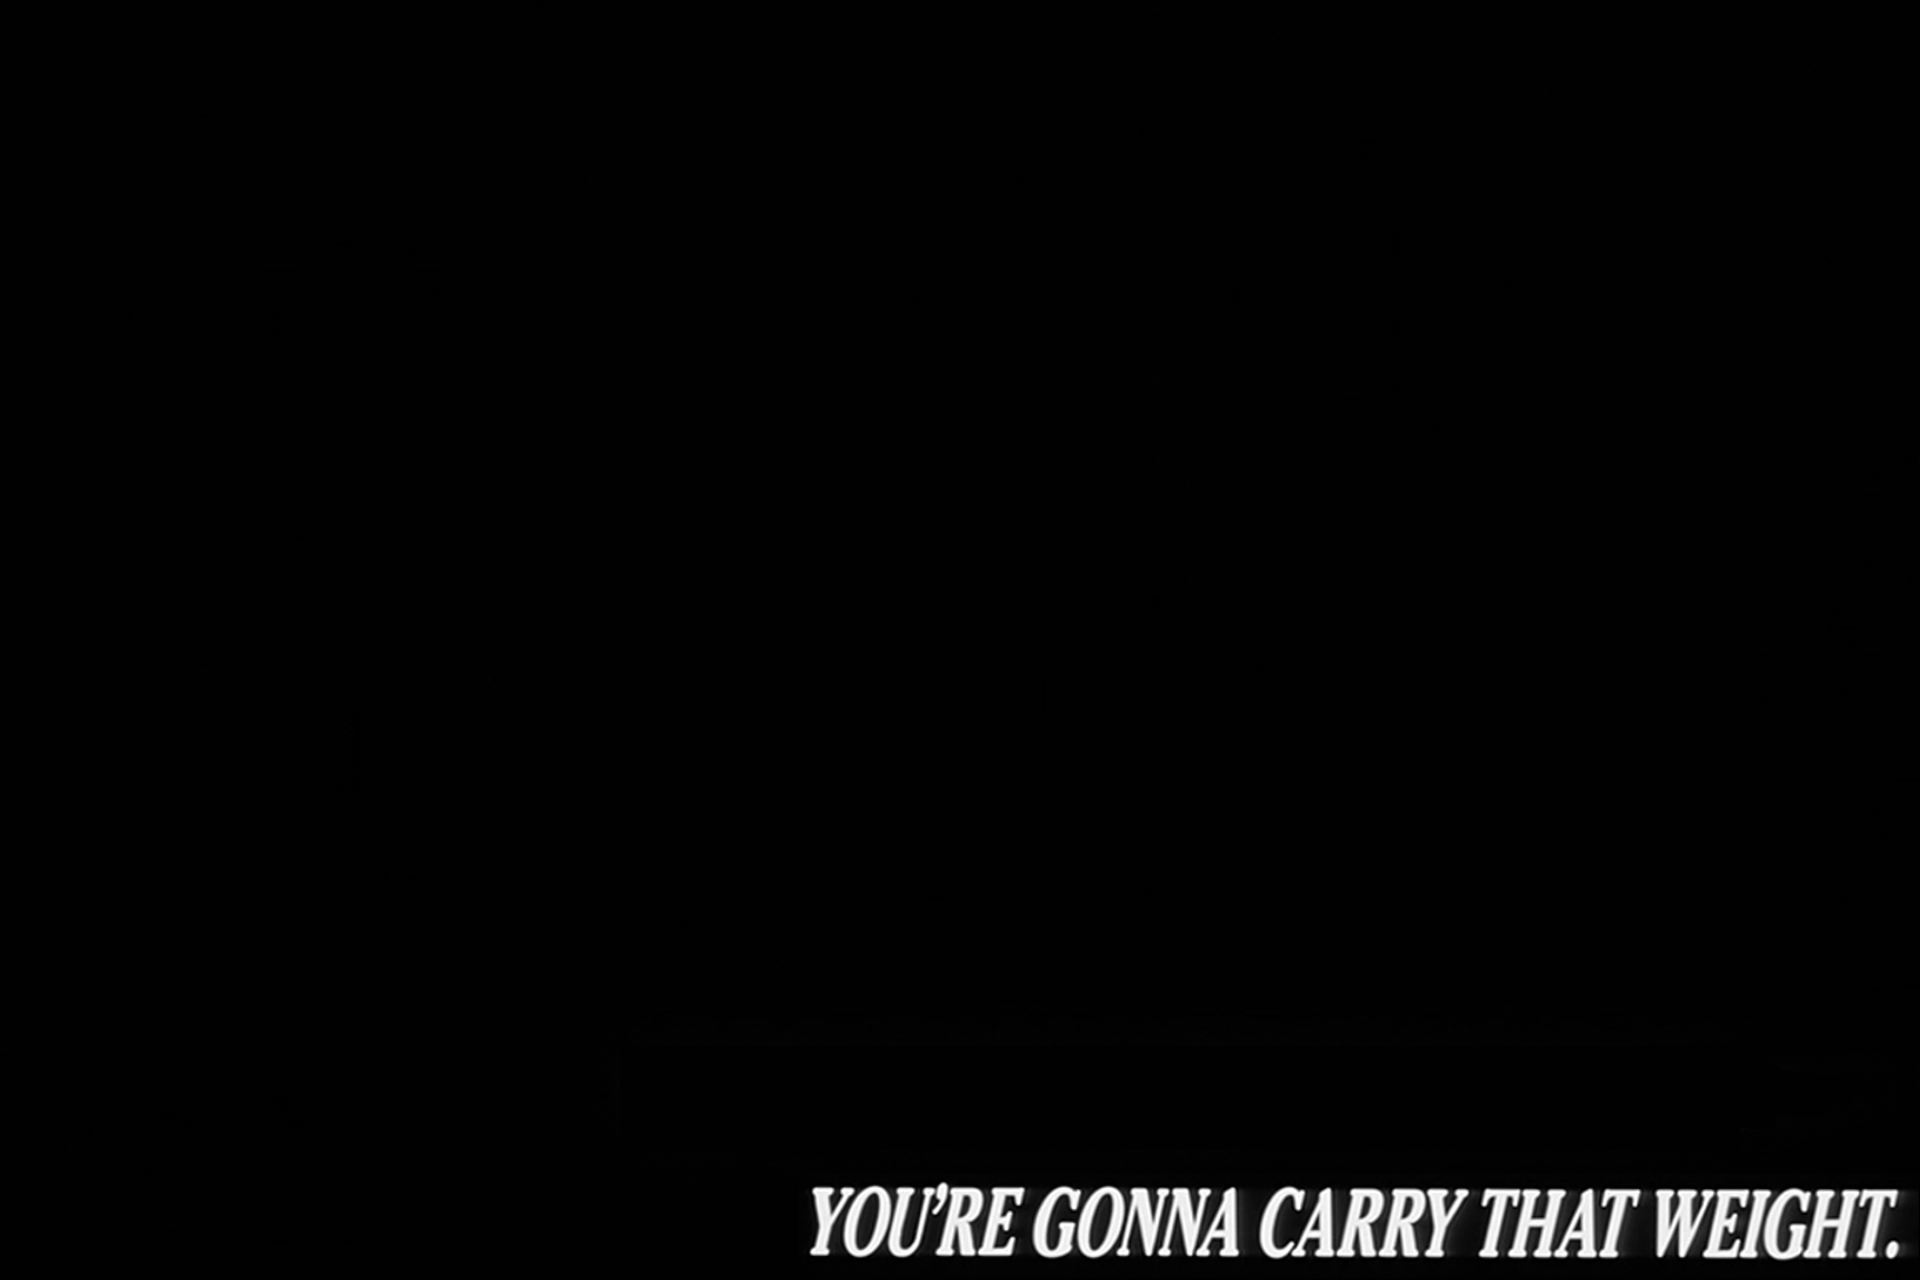 You're Gonna Carry That Weight. Wallpaper